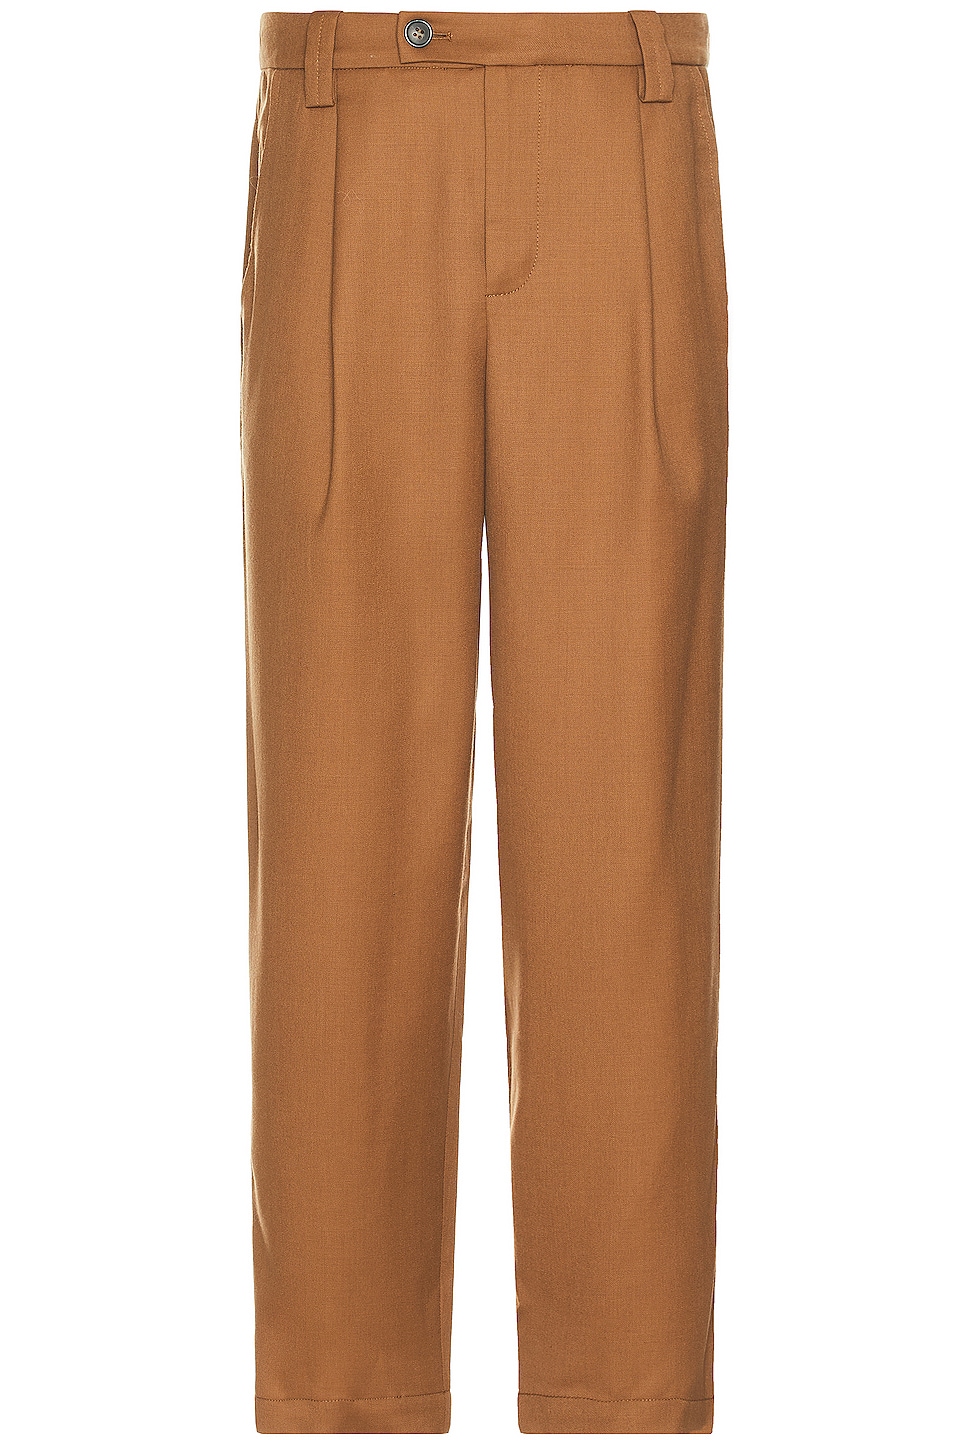 Image 1 of A.P.C. Renato Pant in Icy Brown